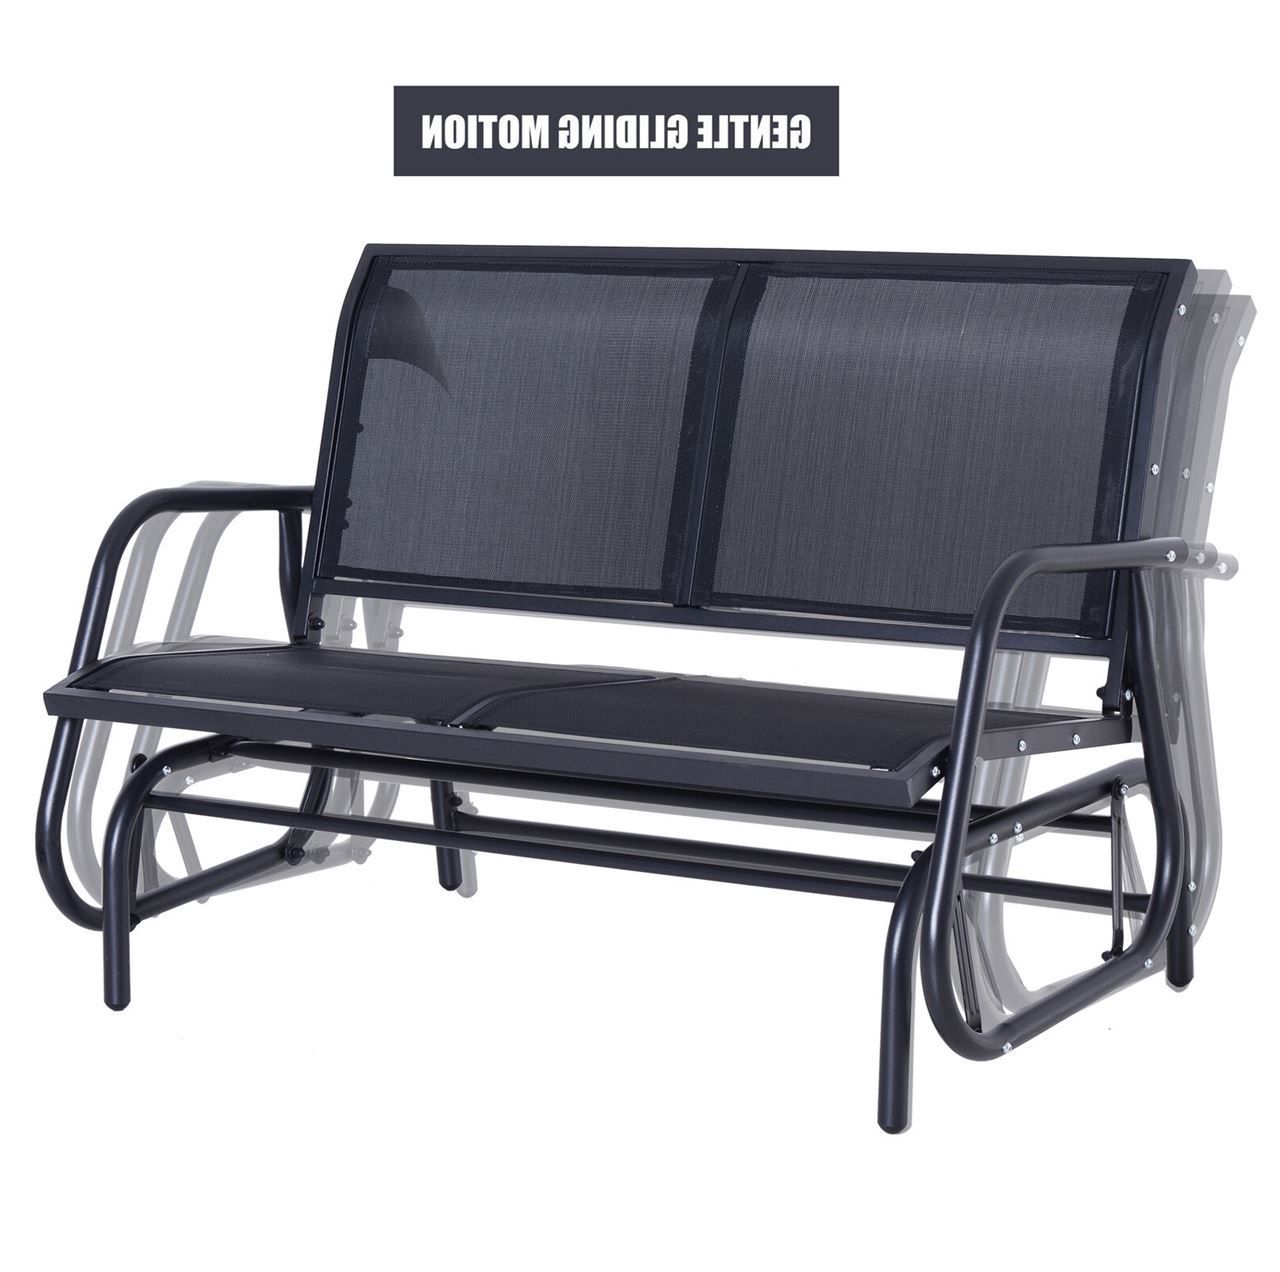 Trendy Outdoor Patio Swing Glider Benches In Outdoor Patio Swing Glider Bench Chair – Dark Gray (View 17 of 30)